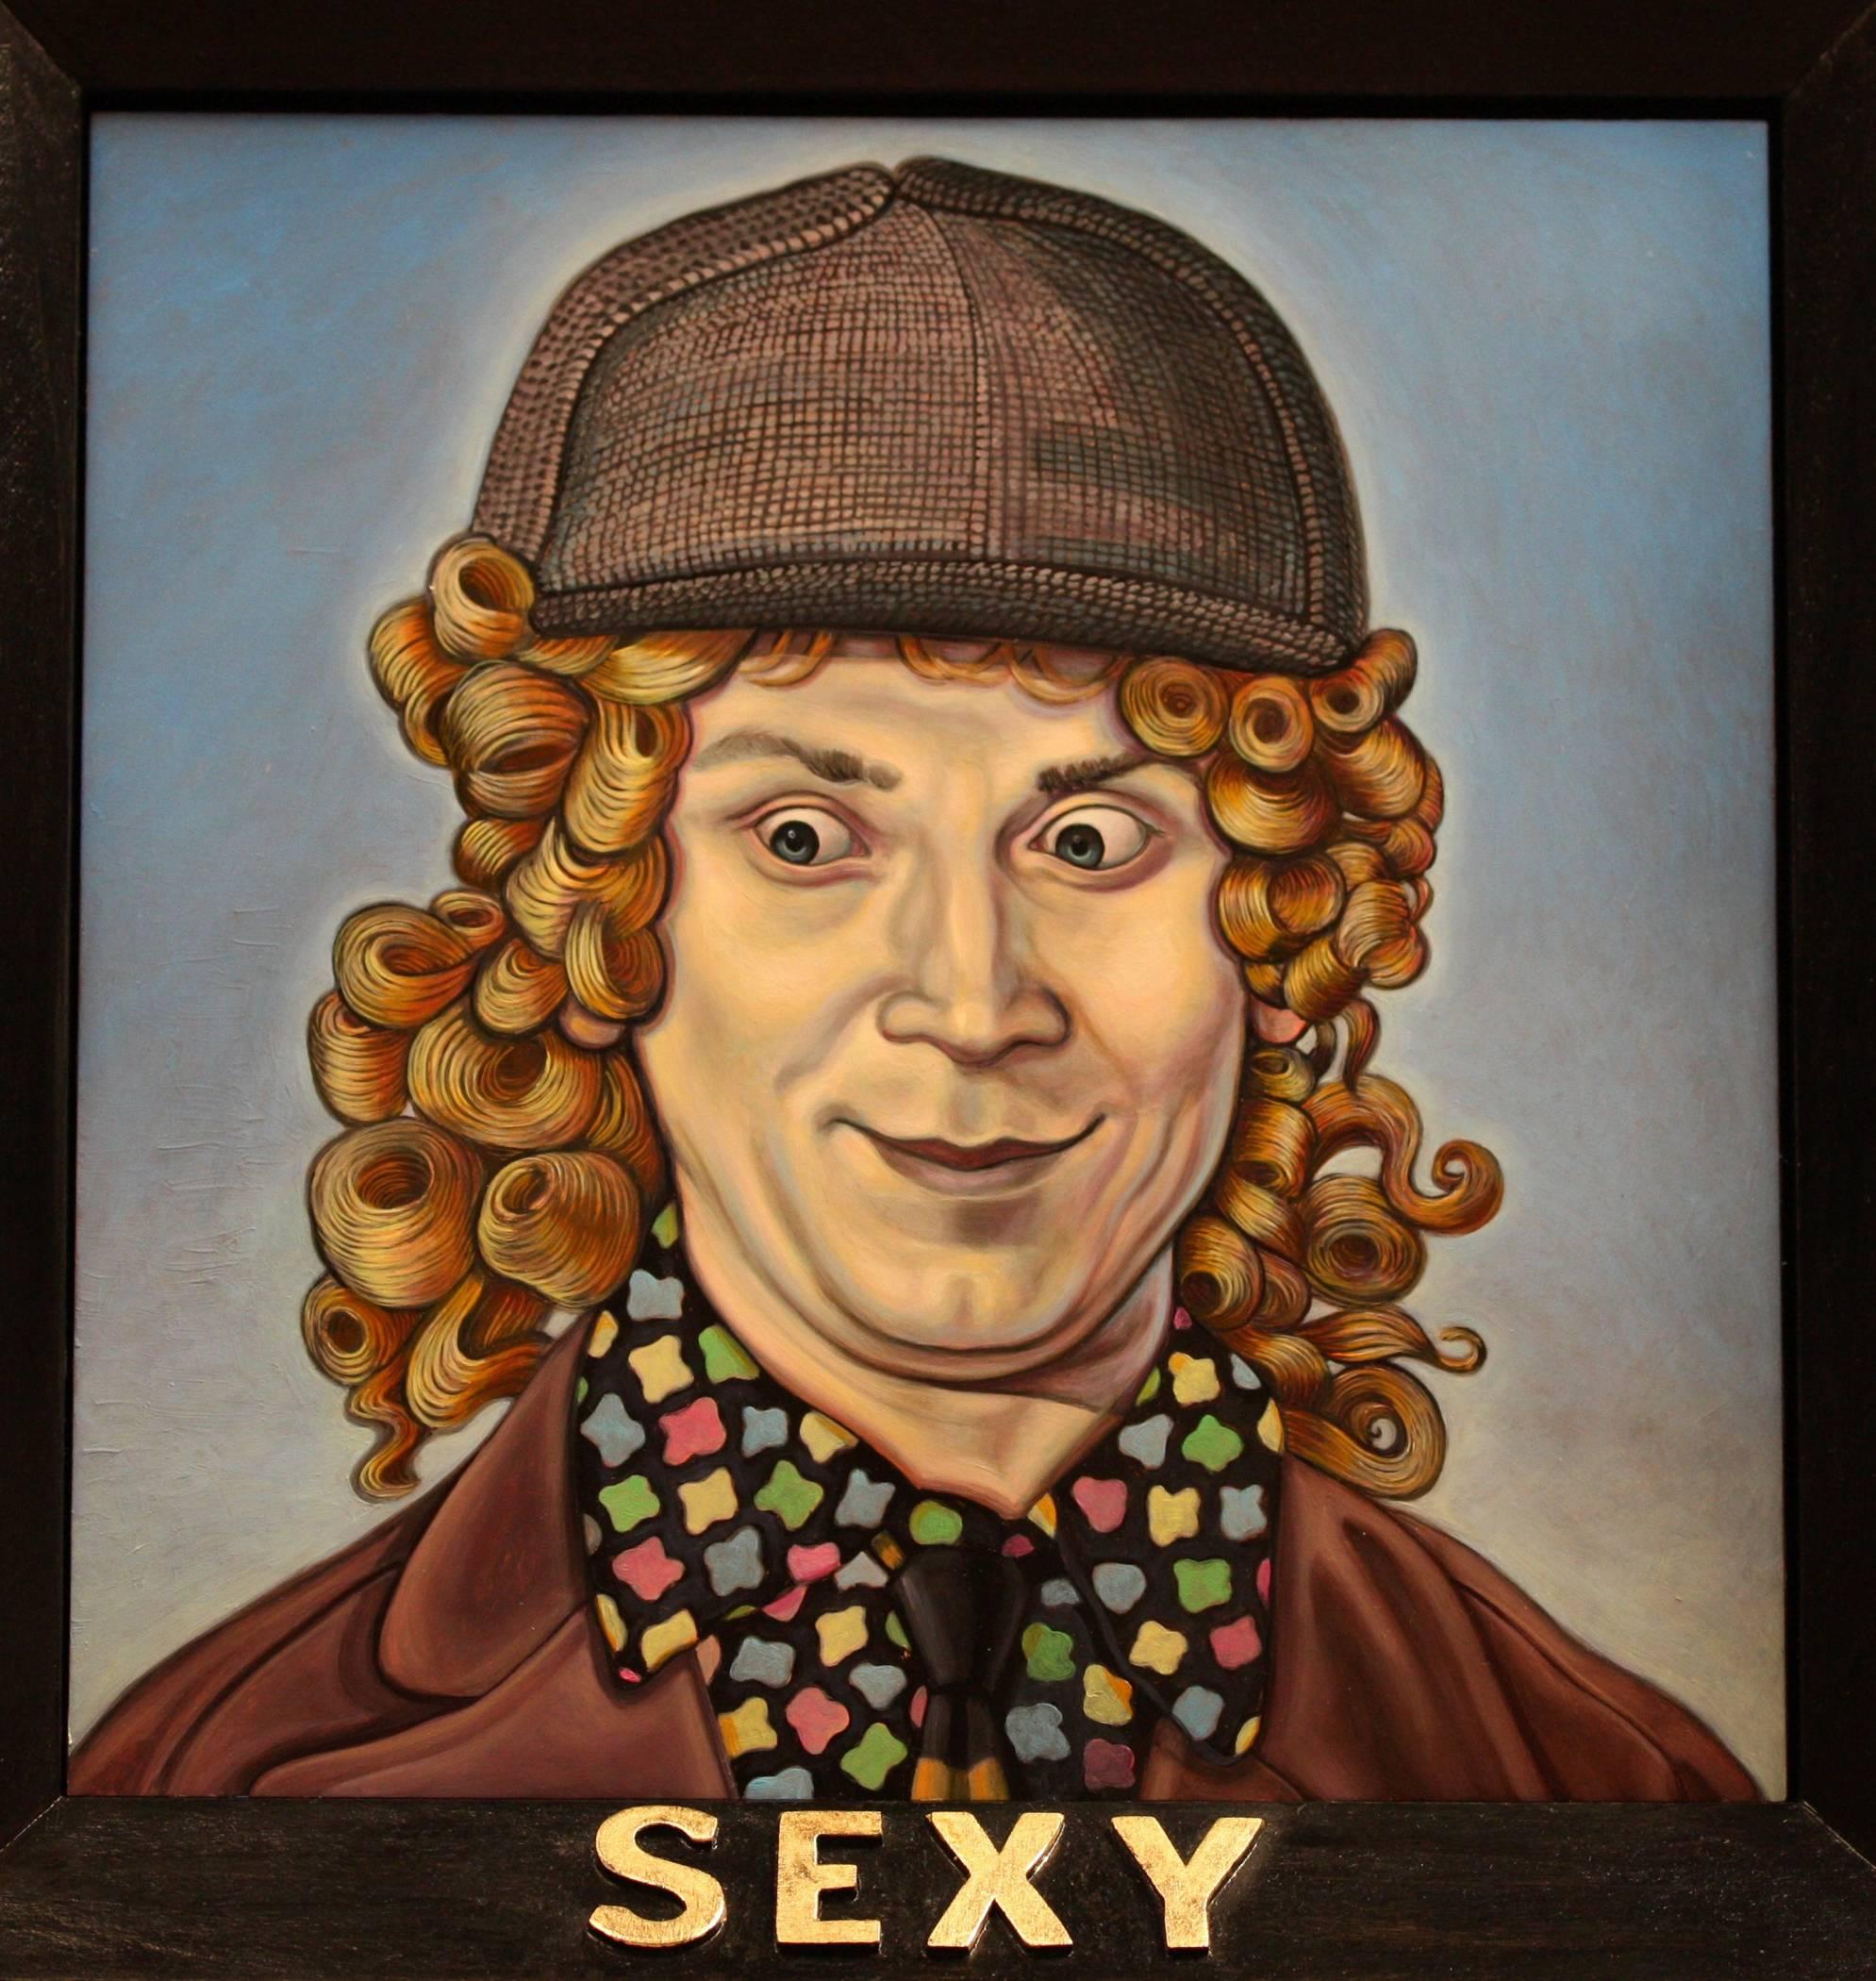 Jed Jackson Figurative Painting - "Sexy", Framed, Contemporary, Oil, Portrait, Painting, on Copper